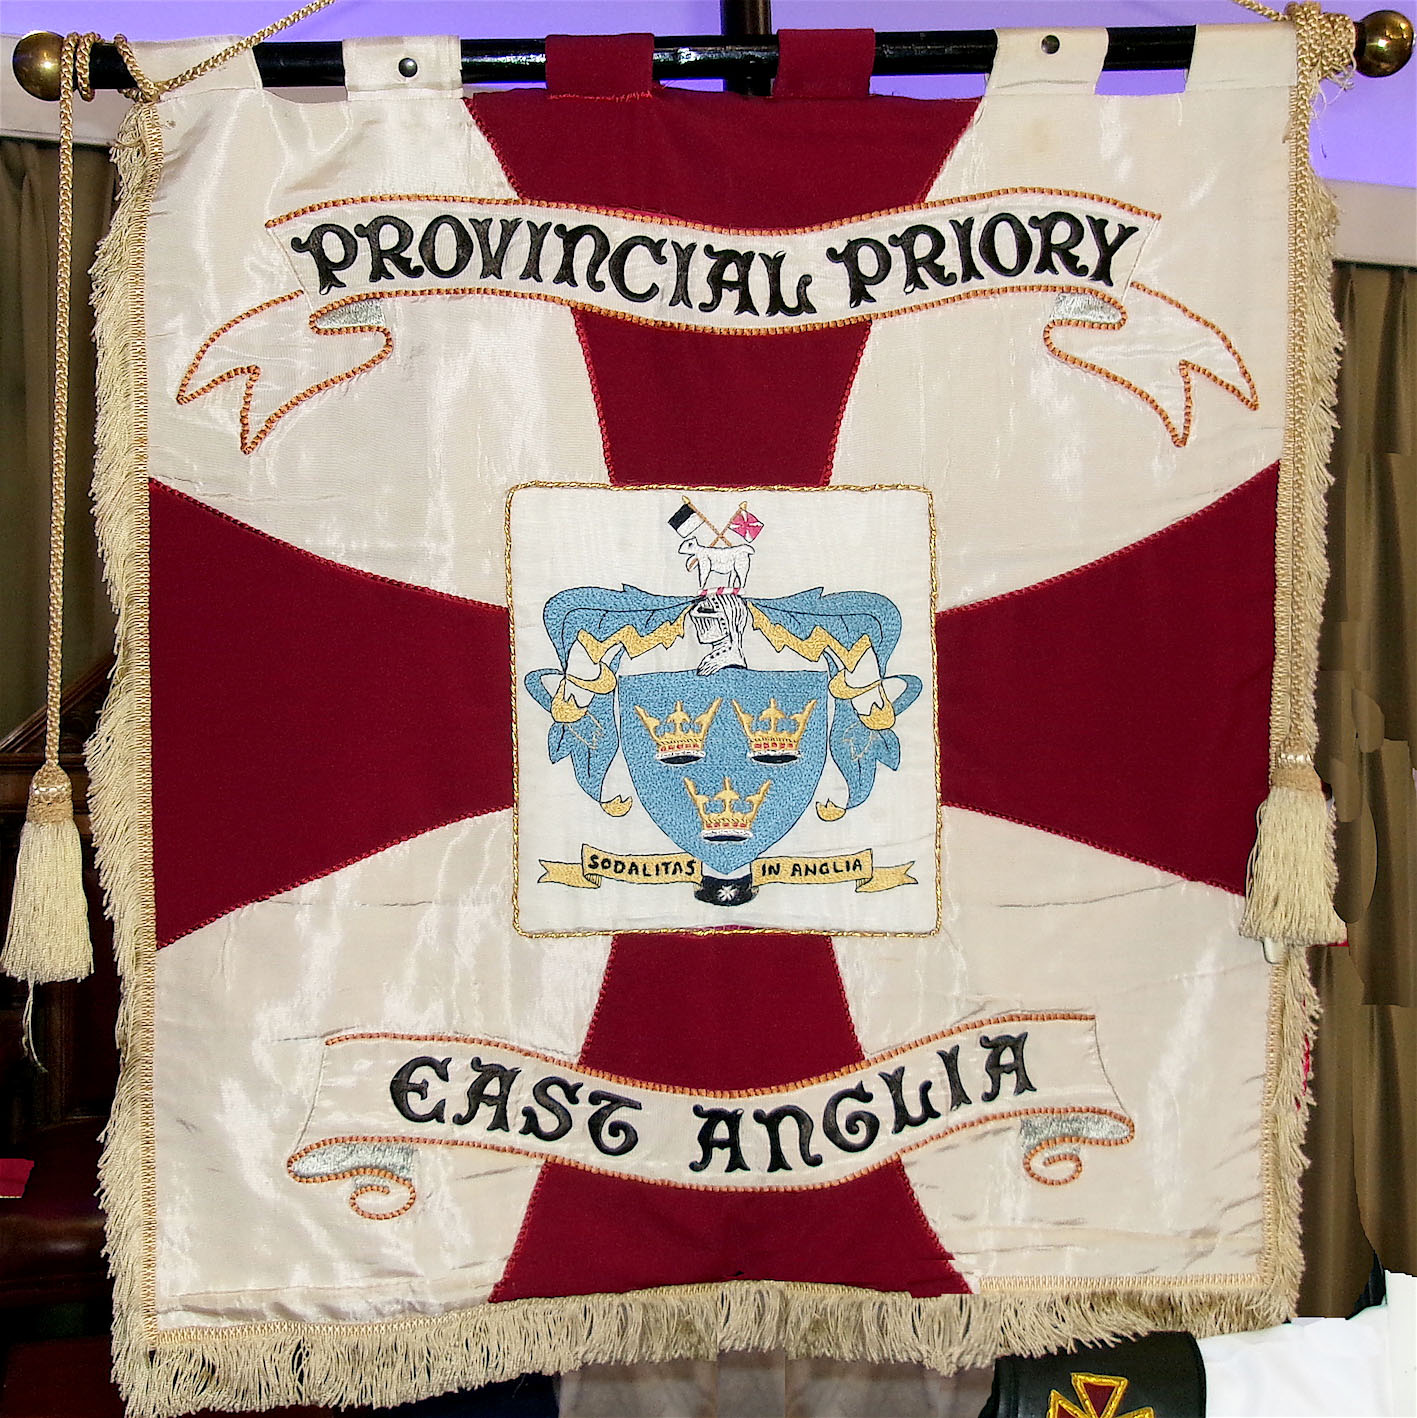 The East Anglia Provincial Banner